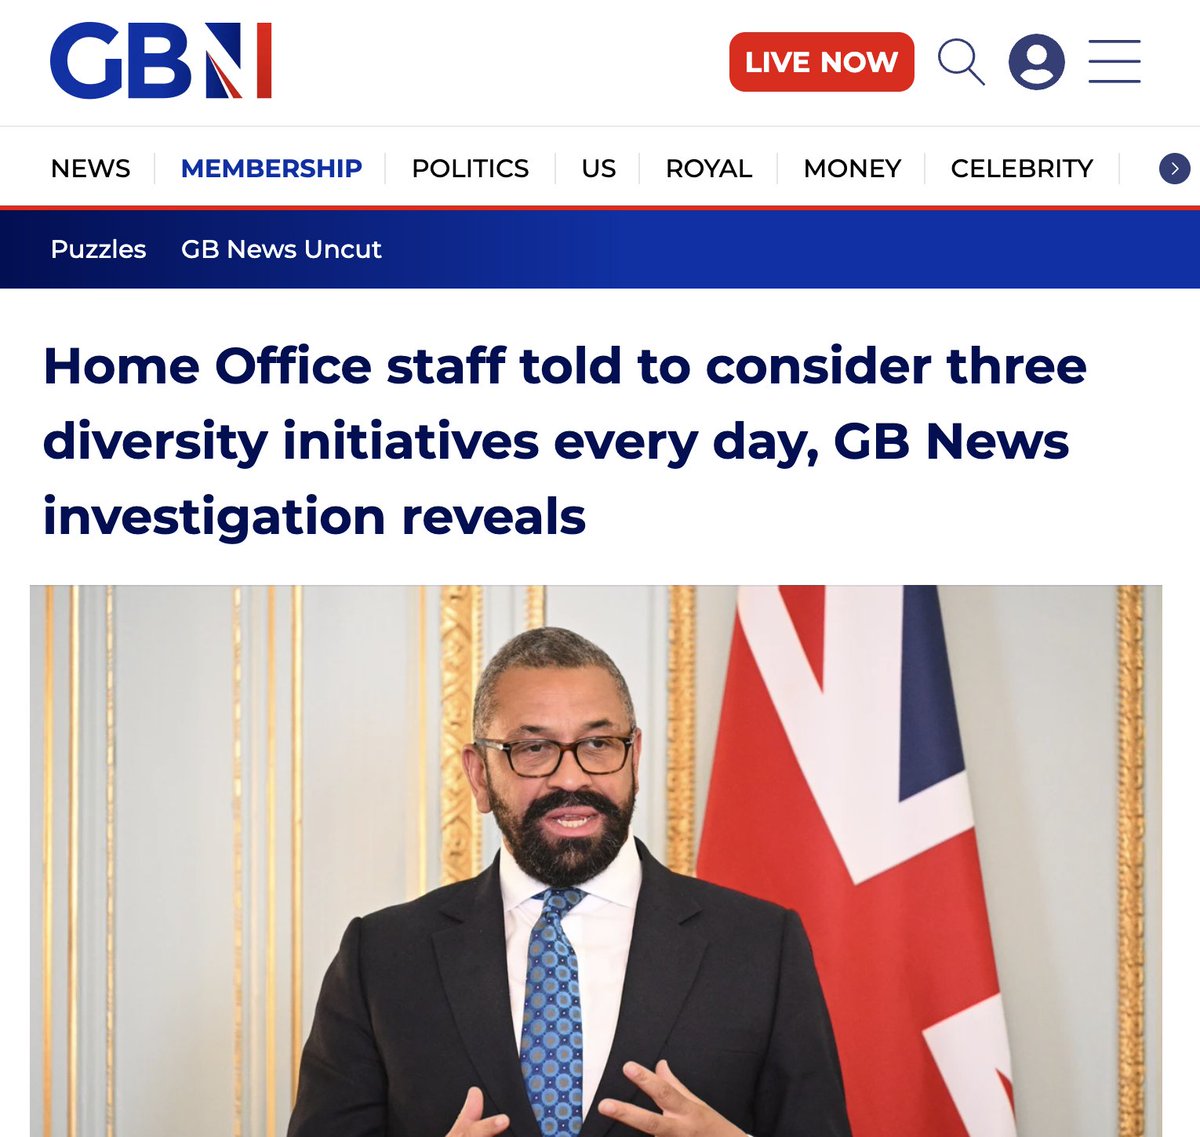 My take on the latest sccop from @StevenEdginton for @GBNEWS on Home Office staff being told to consider three diversity initiatives every day. gbnews.com/membership/hom…